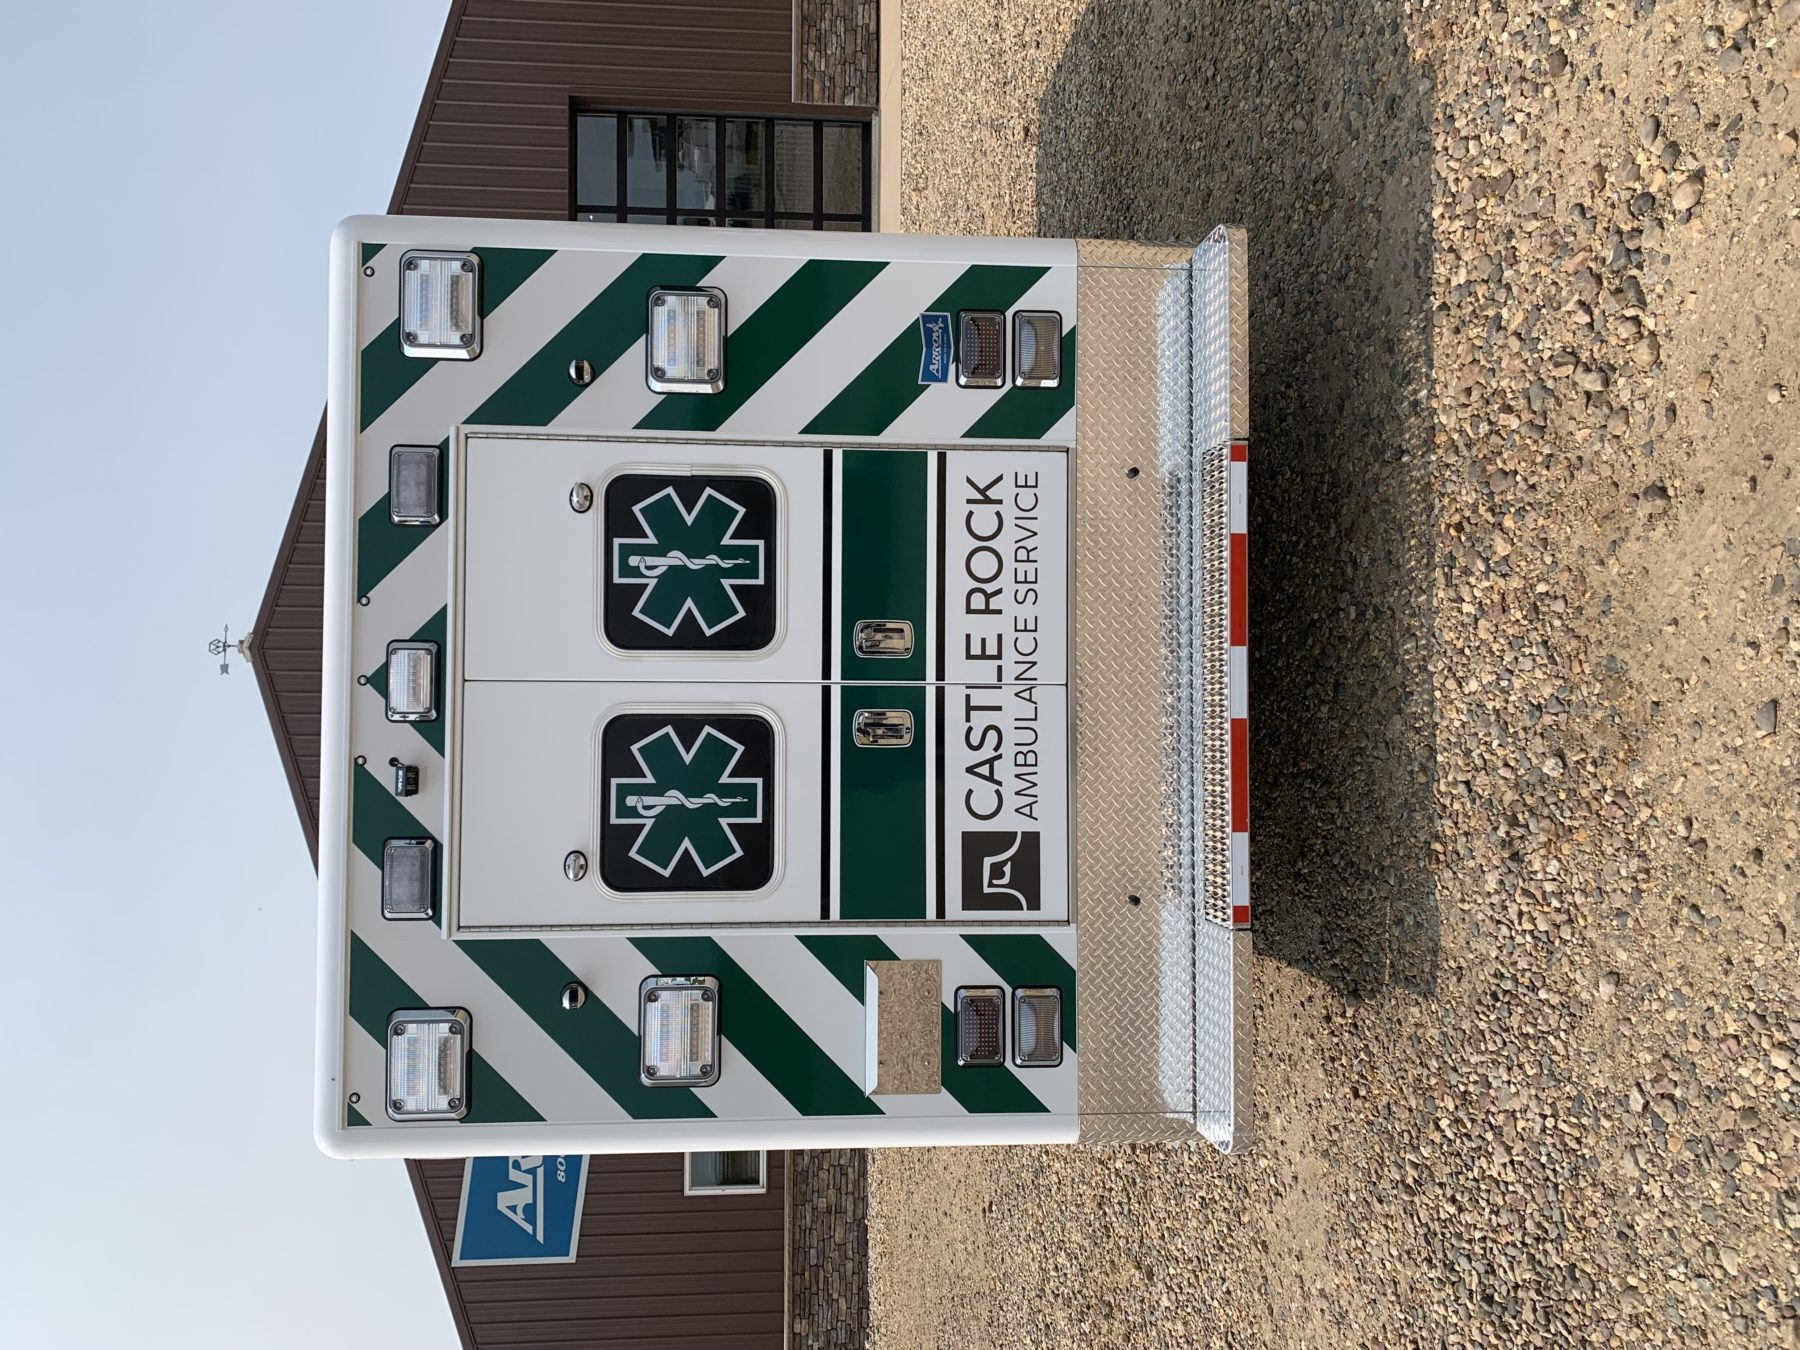 2022 Ram 4500 4x4 Heavy Duty Ambulance For Sale – Picture 9